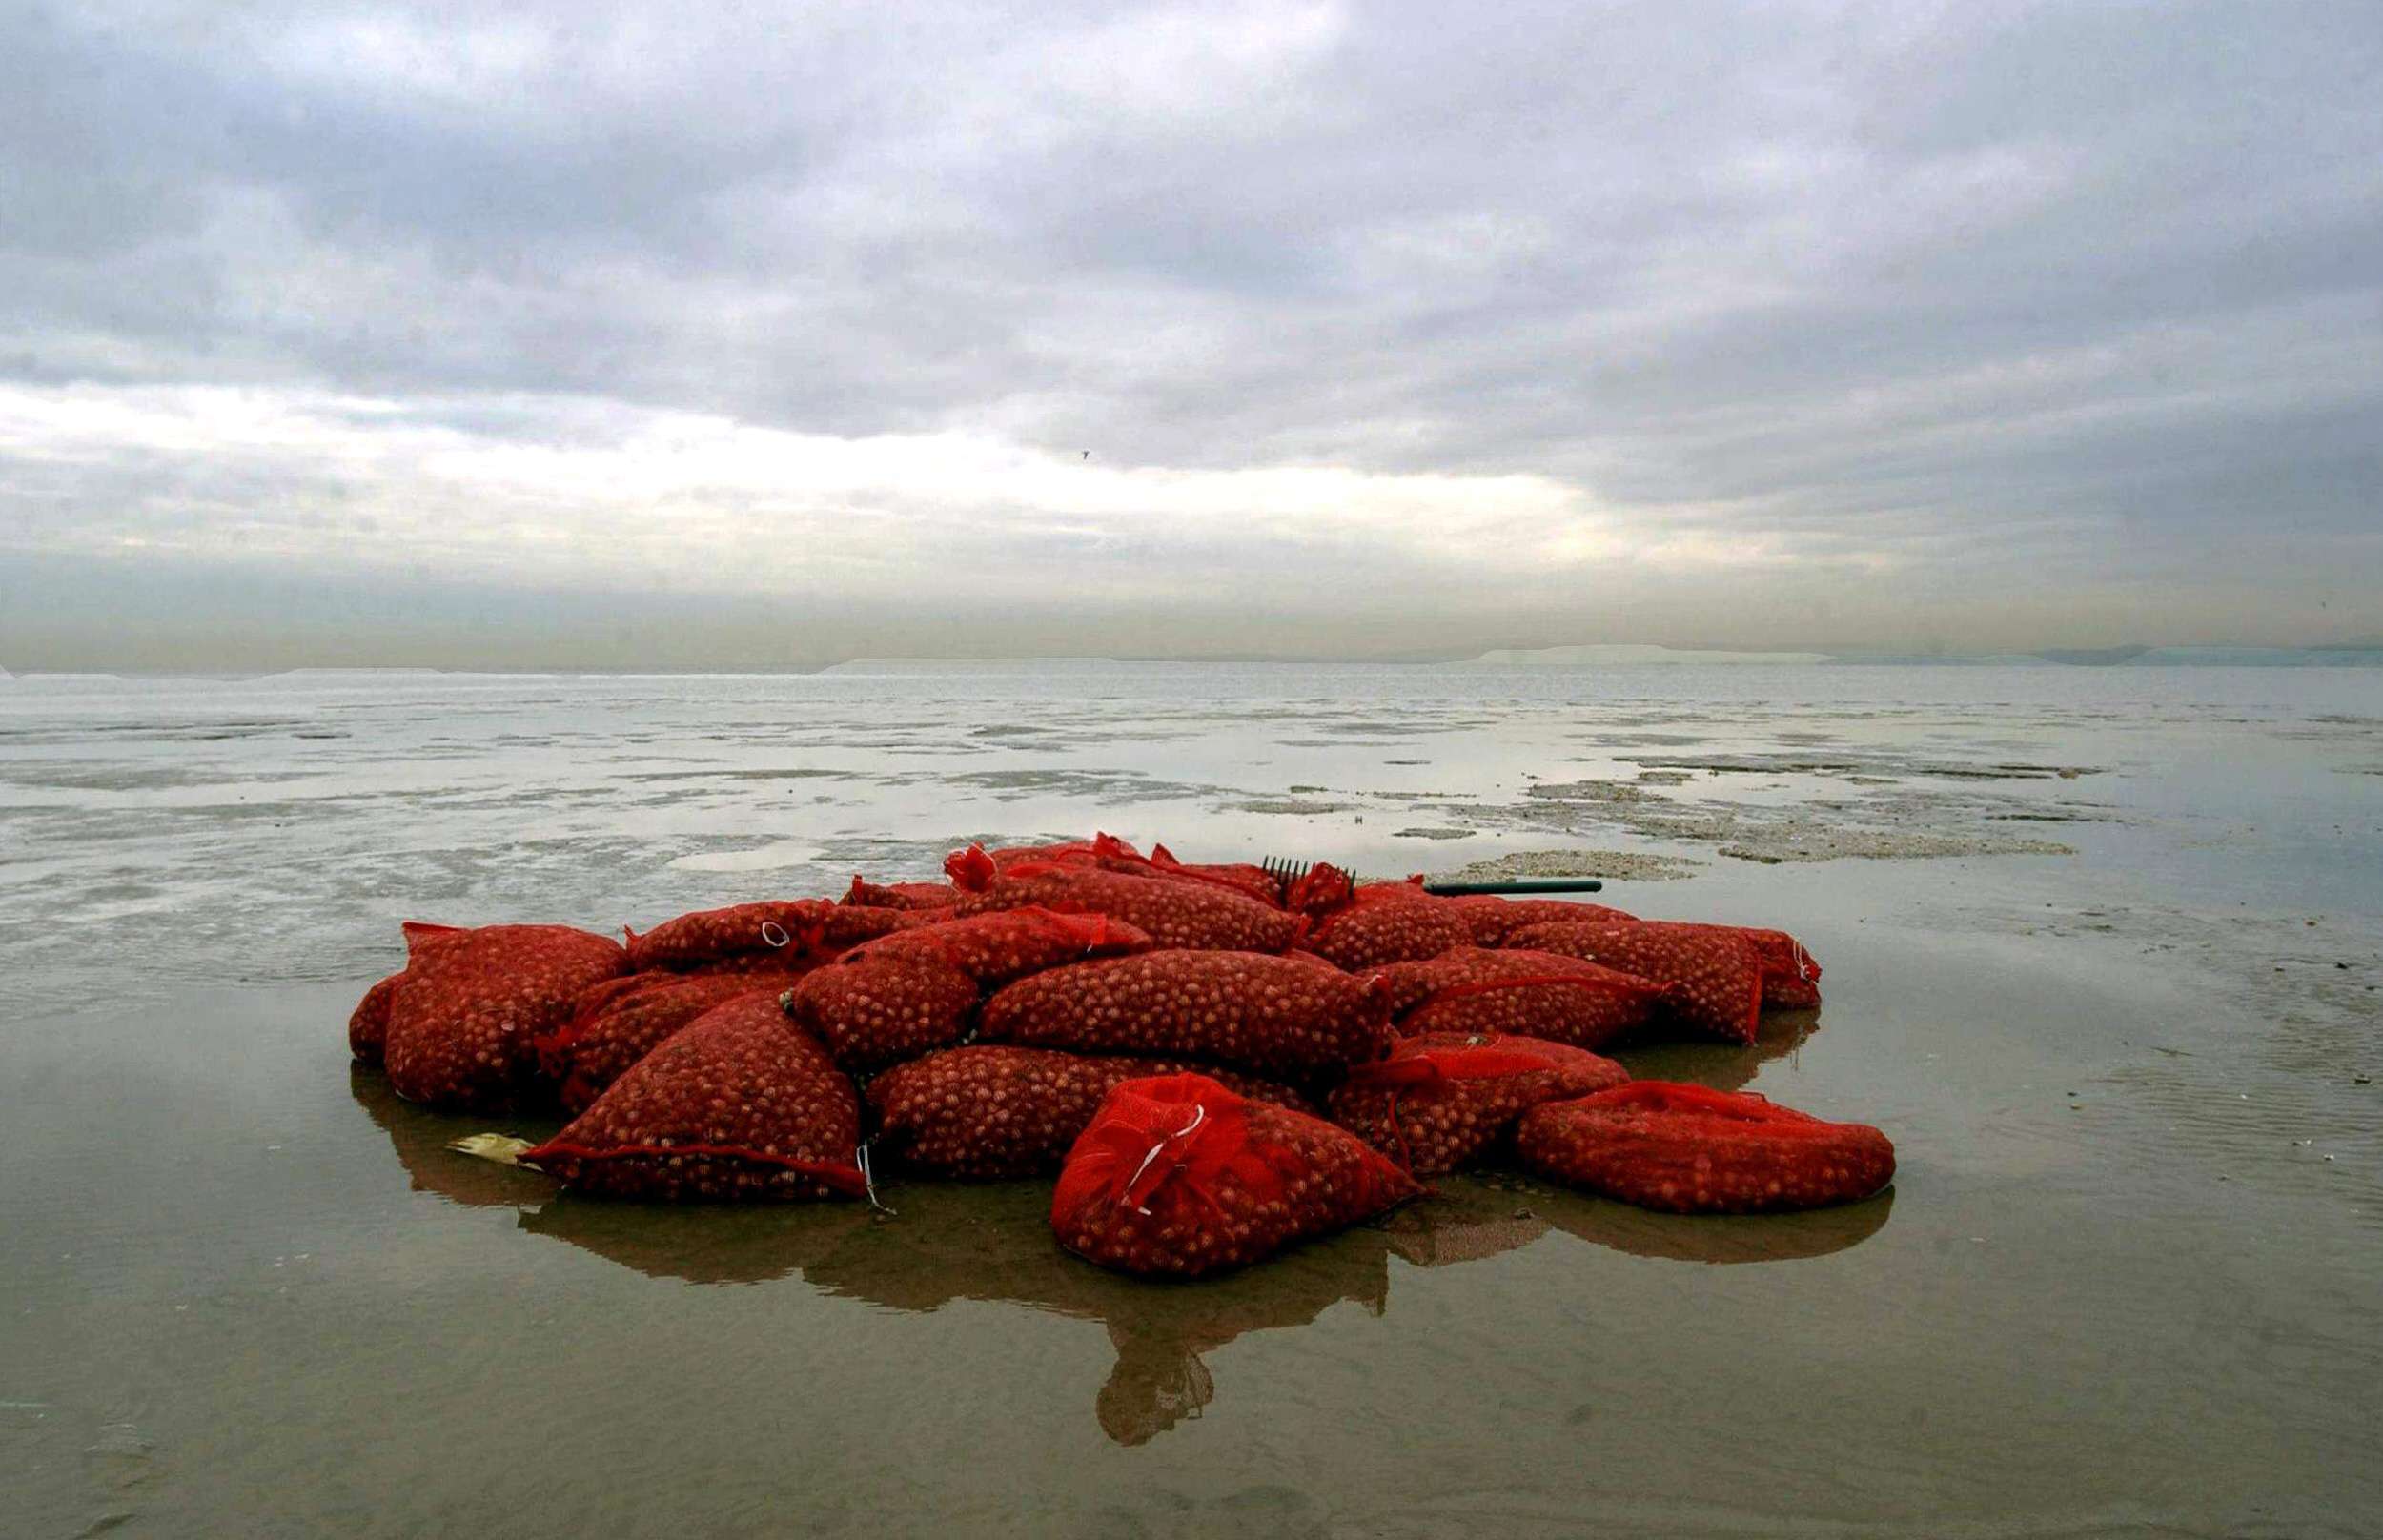 Bags of cockles lie on the beach at Morecambe Bay, more than 20 Chinese cockle pickers died in 2004. Photo: AFP